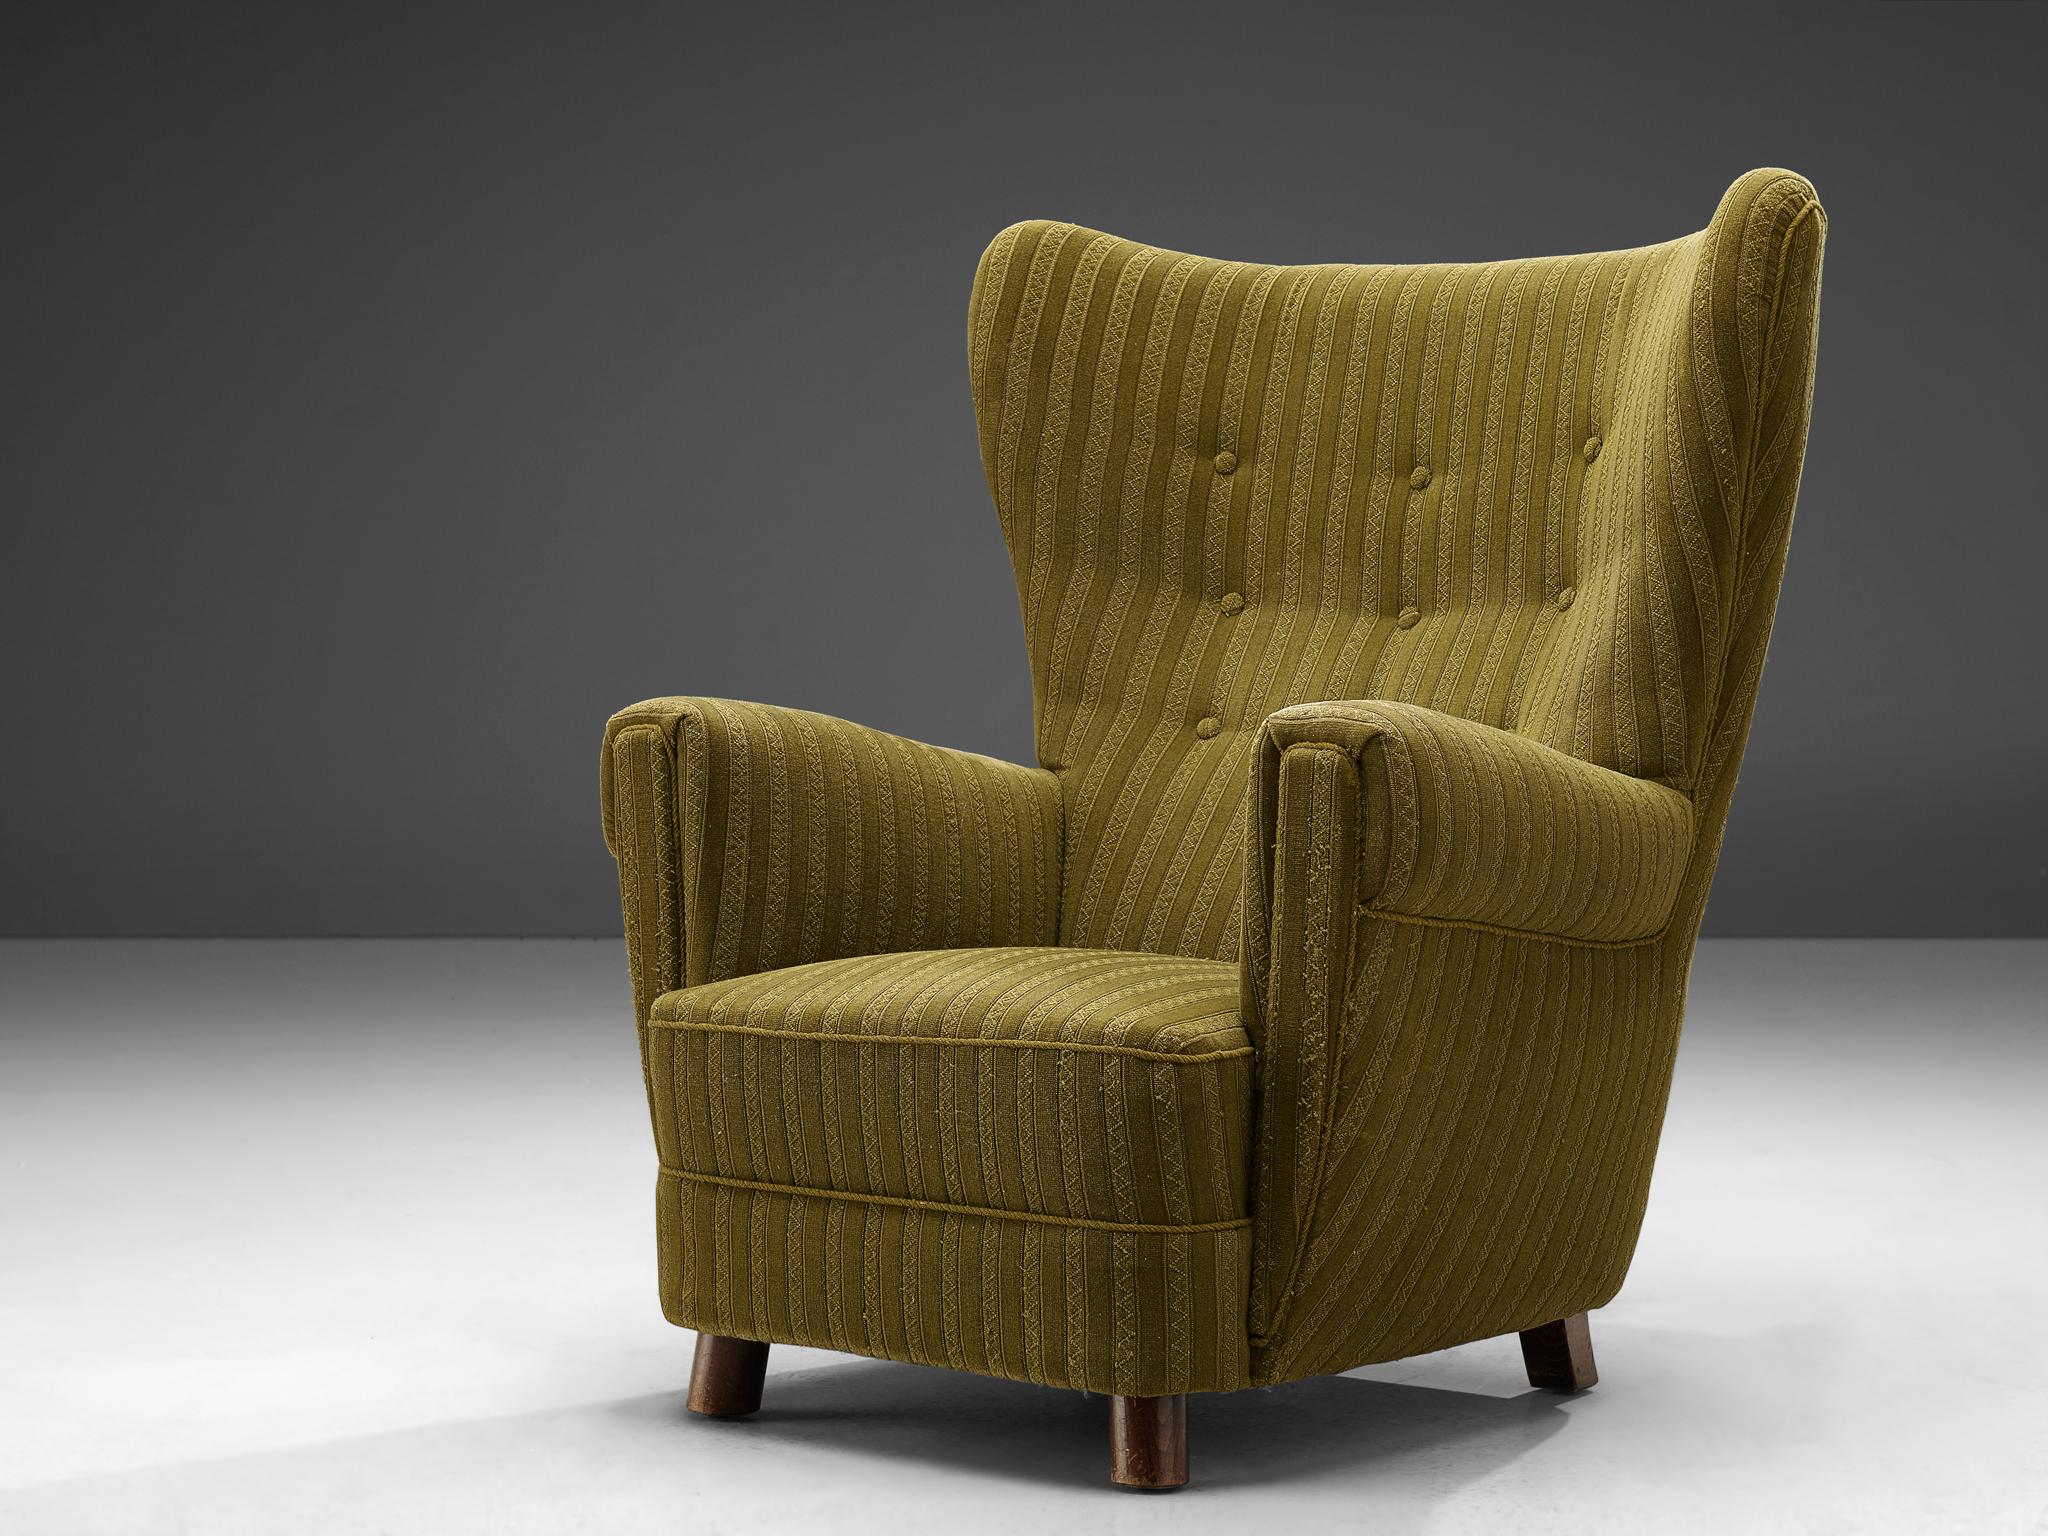 Wingback armchair, green striped upholstery, wood, Denmark, 1950s.

This Classic Danish wingback chair is upholstered in a green striped fabric and is finished with green piping and a tufted backrest. The rounded shape of the backrest and seat give